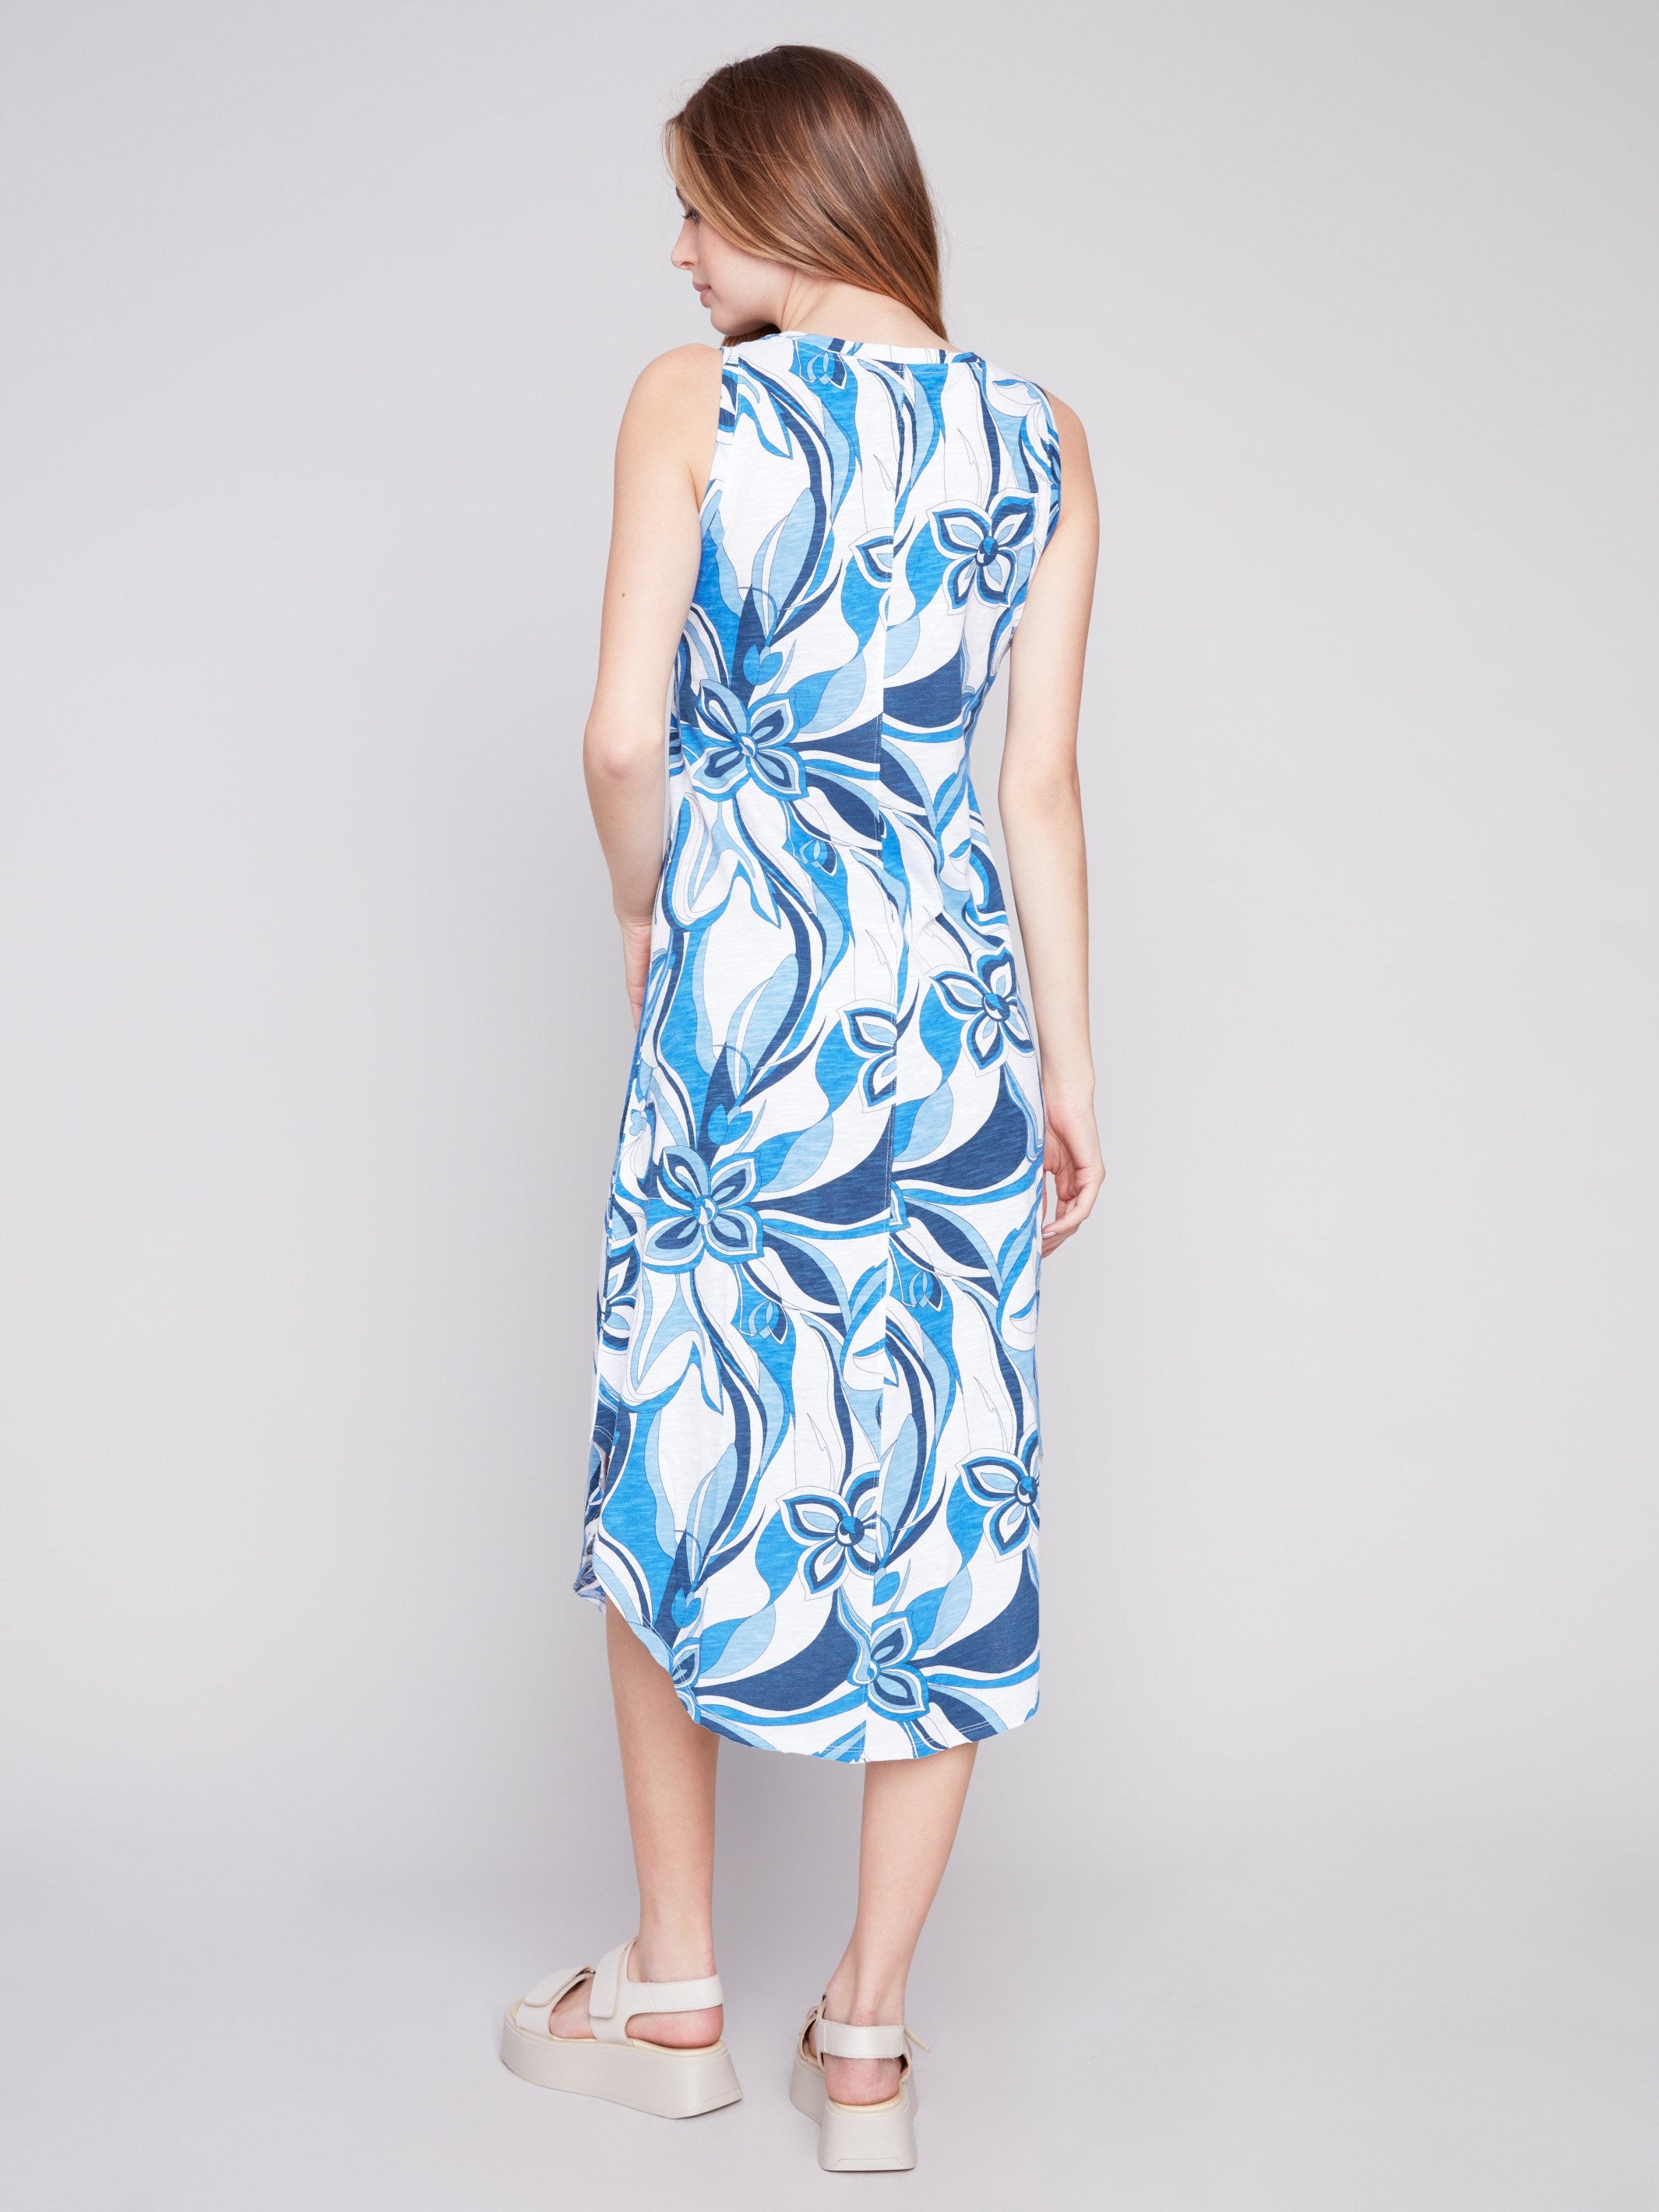 Printed Sleeveless Cotton Dress - Sky - Charlie B Collection Canada - Image 2